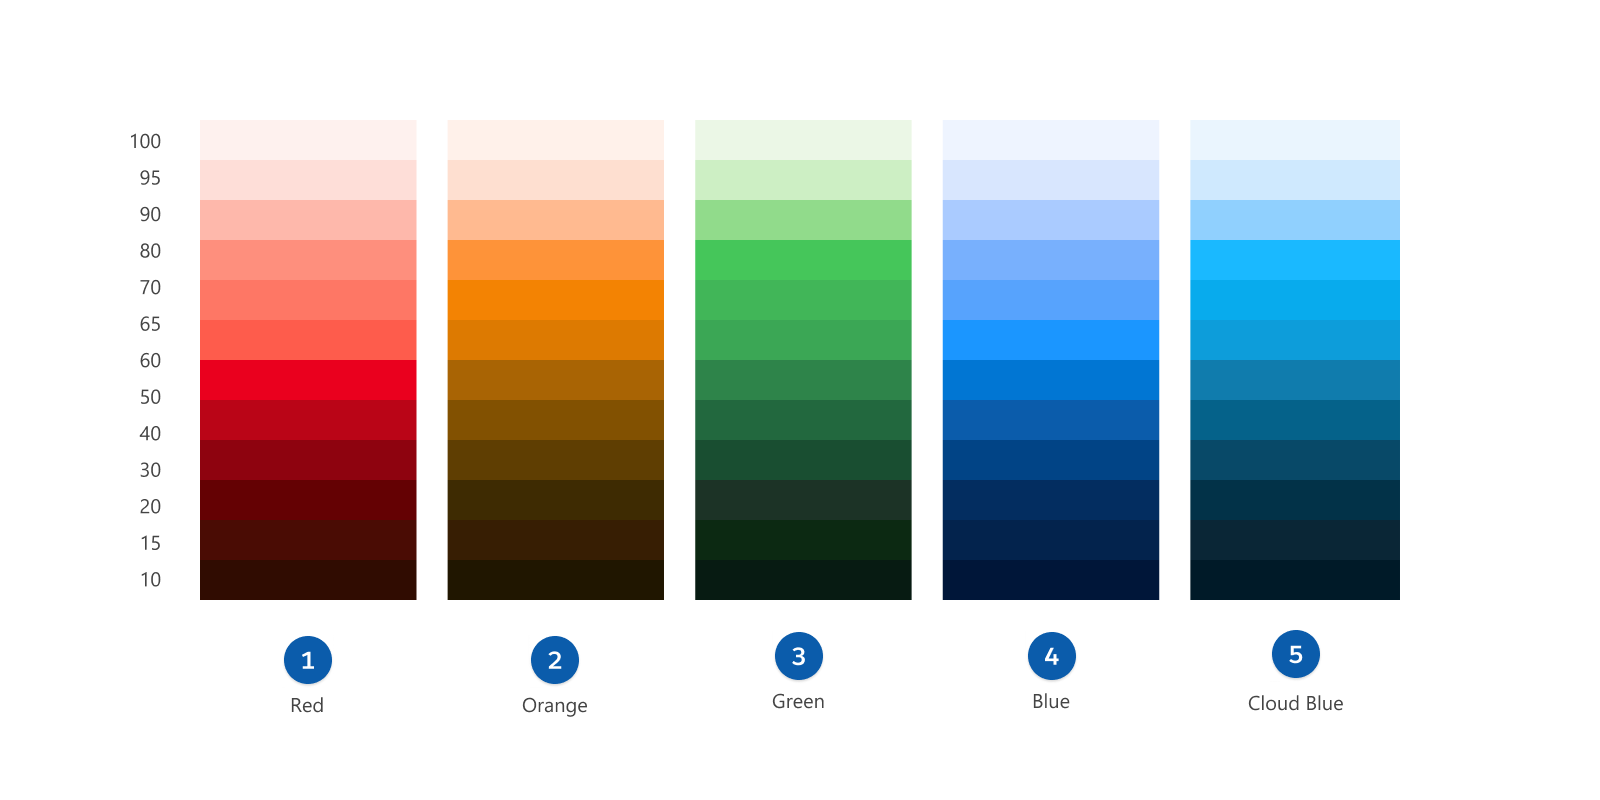 The  Salesforce Primary Palette, composed of red (1), orange (2), green (3), blue (4), and Cloud blue (5) color patterns.